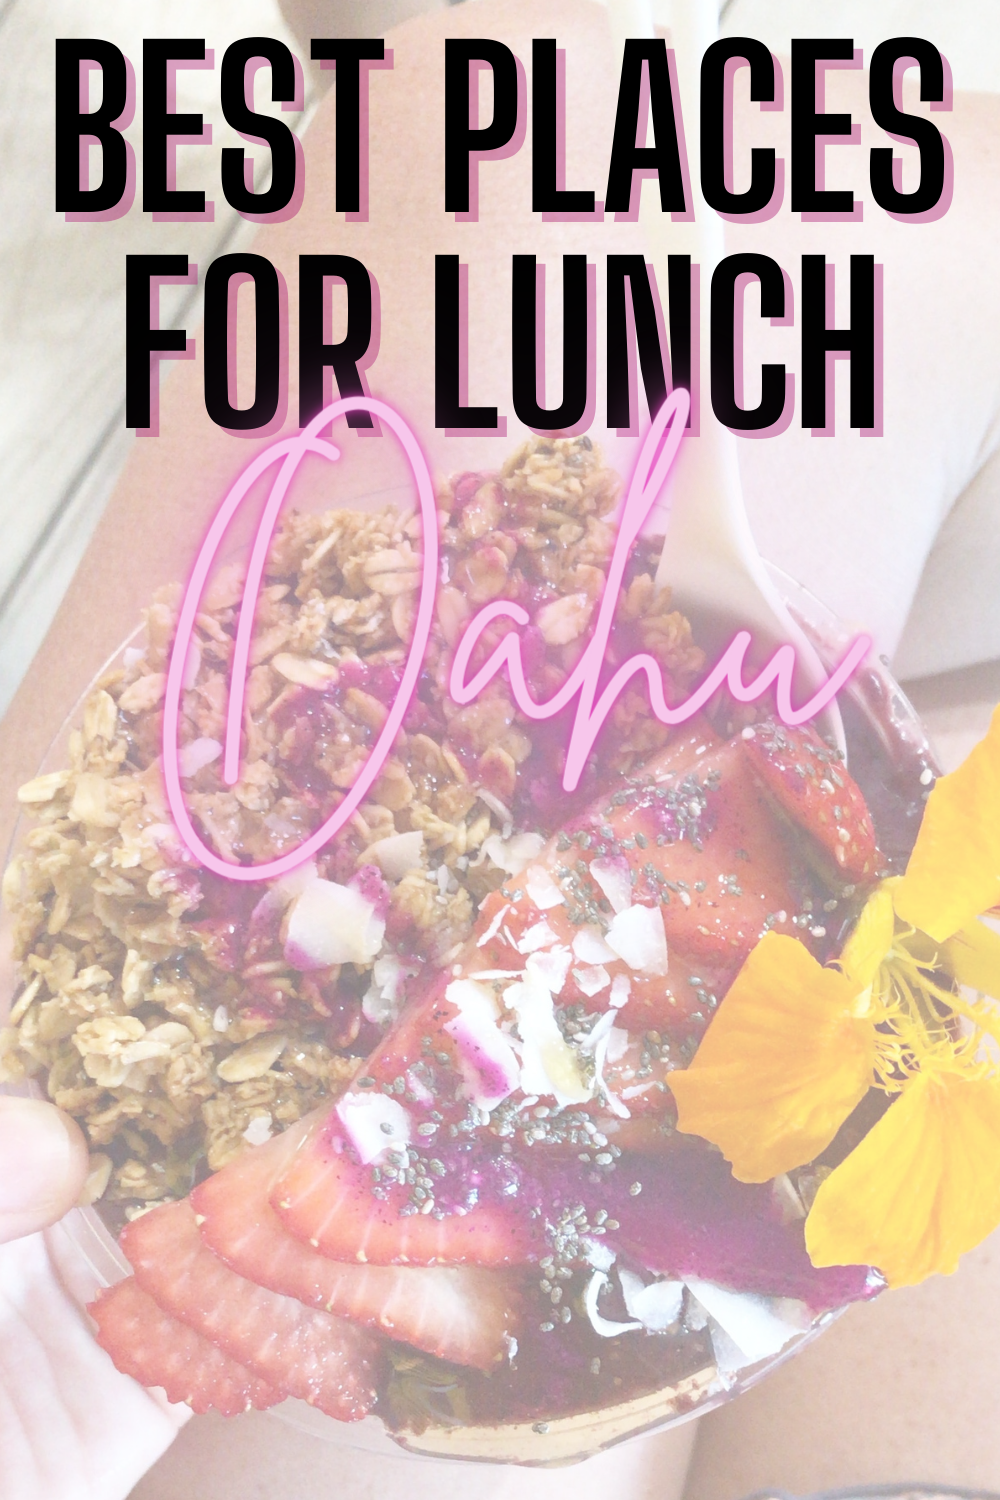 BEST PLACES FOR LUNCH OAHU